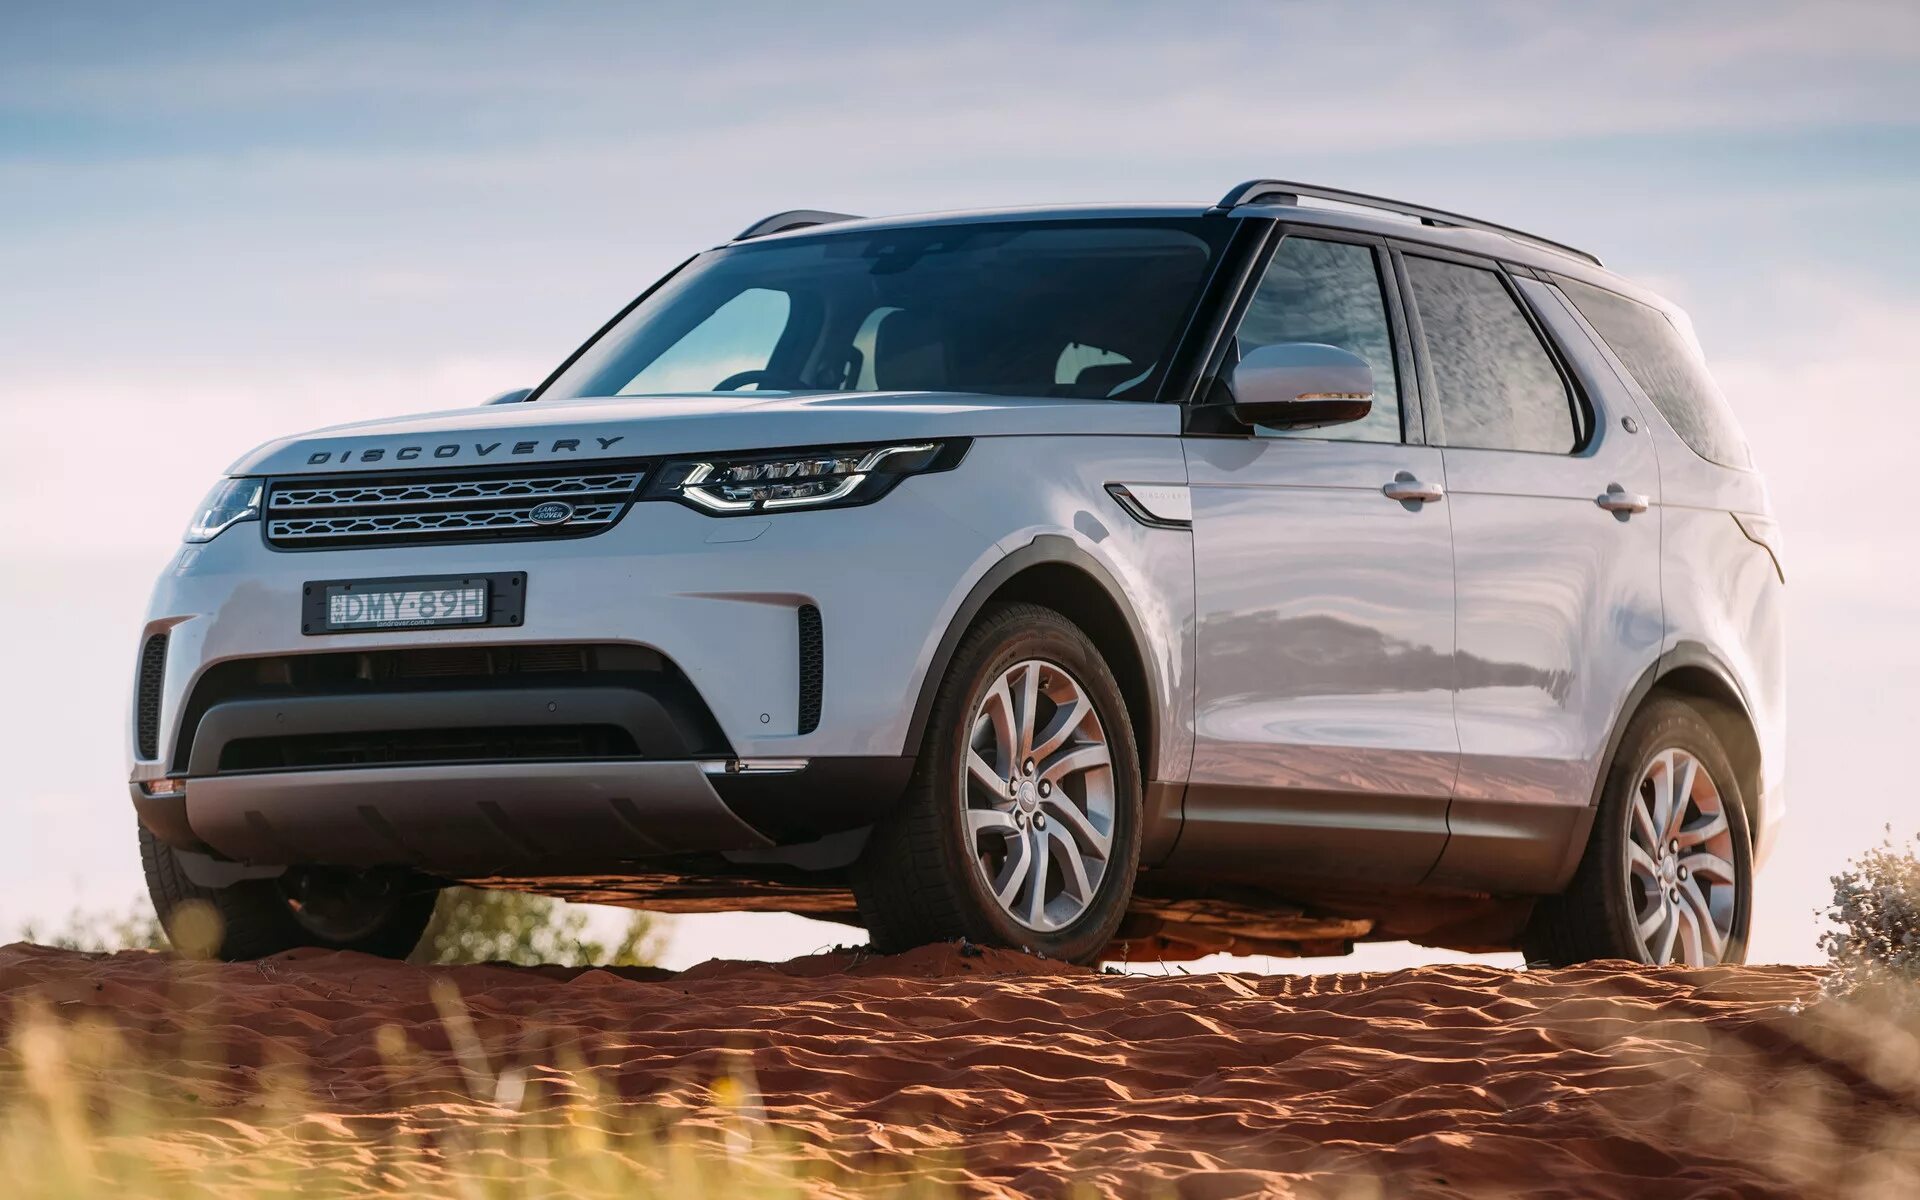 Land Rover Discovery 2022. Ленд Ровер Discovery 2017. Ленд Ровер Дискавери 4 2017. Ленд Ровер Дискавери 2021. Дискавери 720